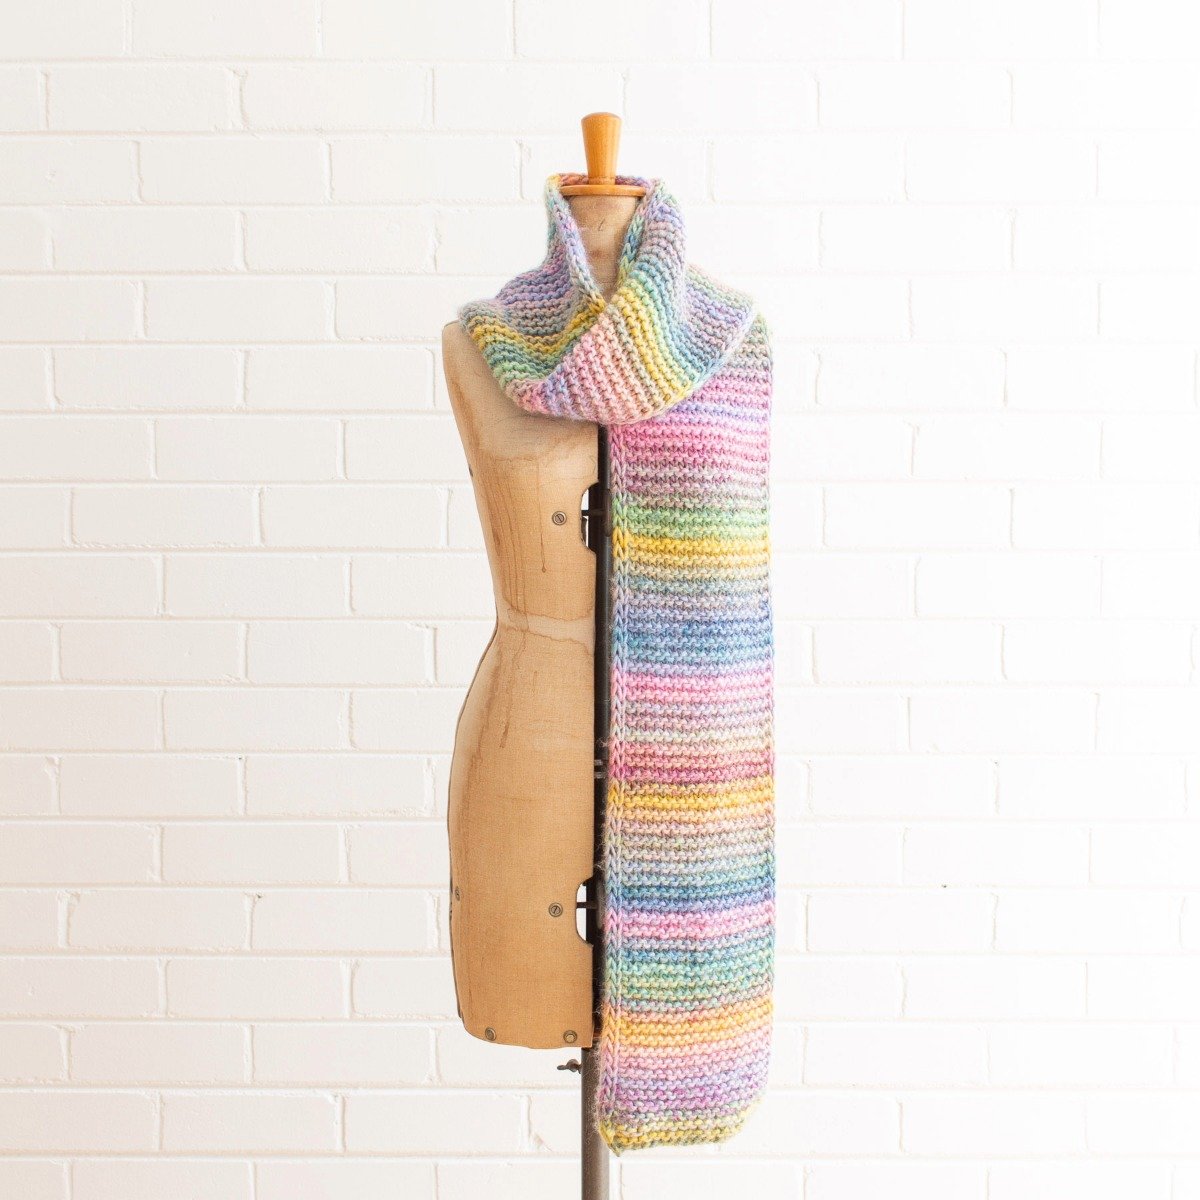 Rainbow Ribbon Scarf kits are back in stock in colourway Gold Rush.

This free pattern is a beginner friendly knitting pattern using our shop favourite - Patons Sierra Chunky.

This vibrant self-striping yarn creates a stunning gradient effect, just 